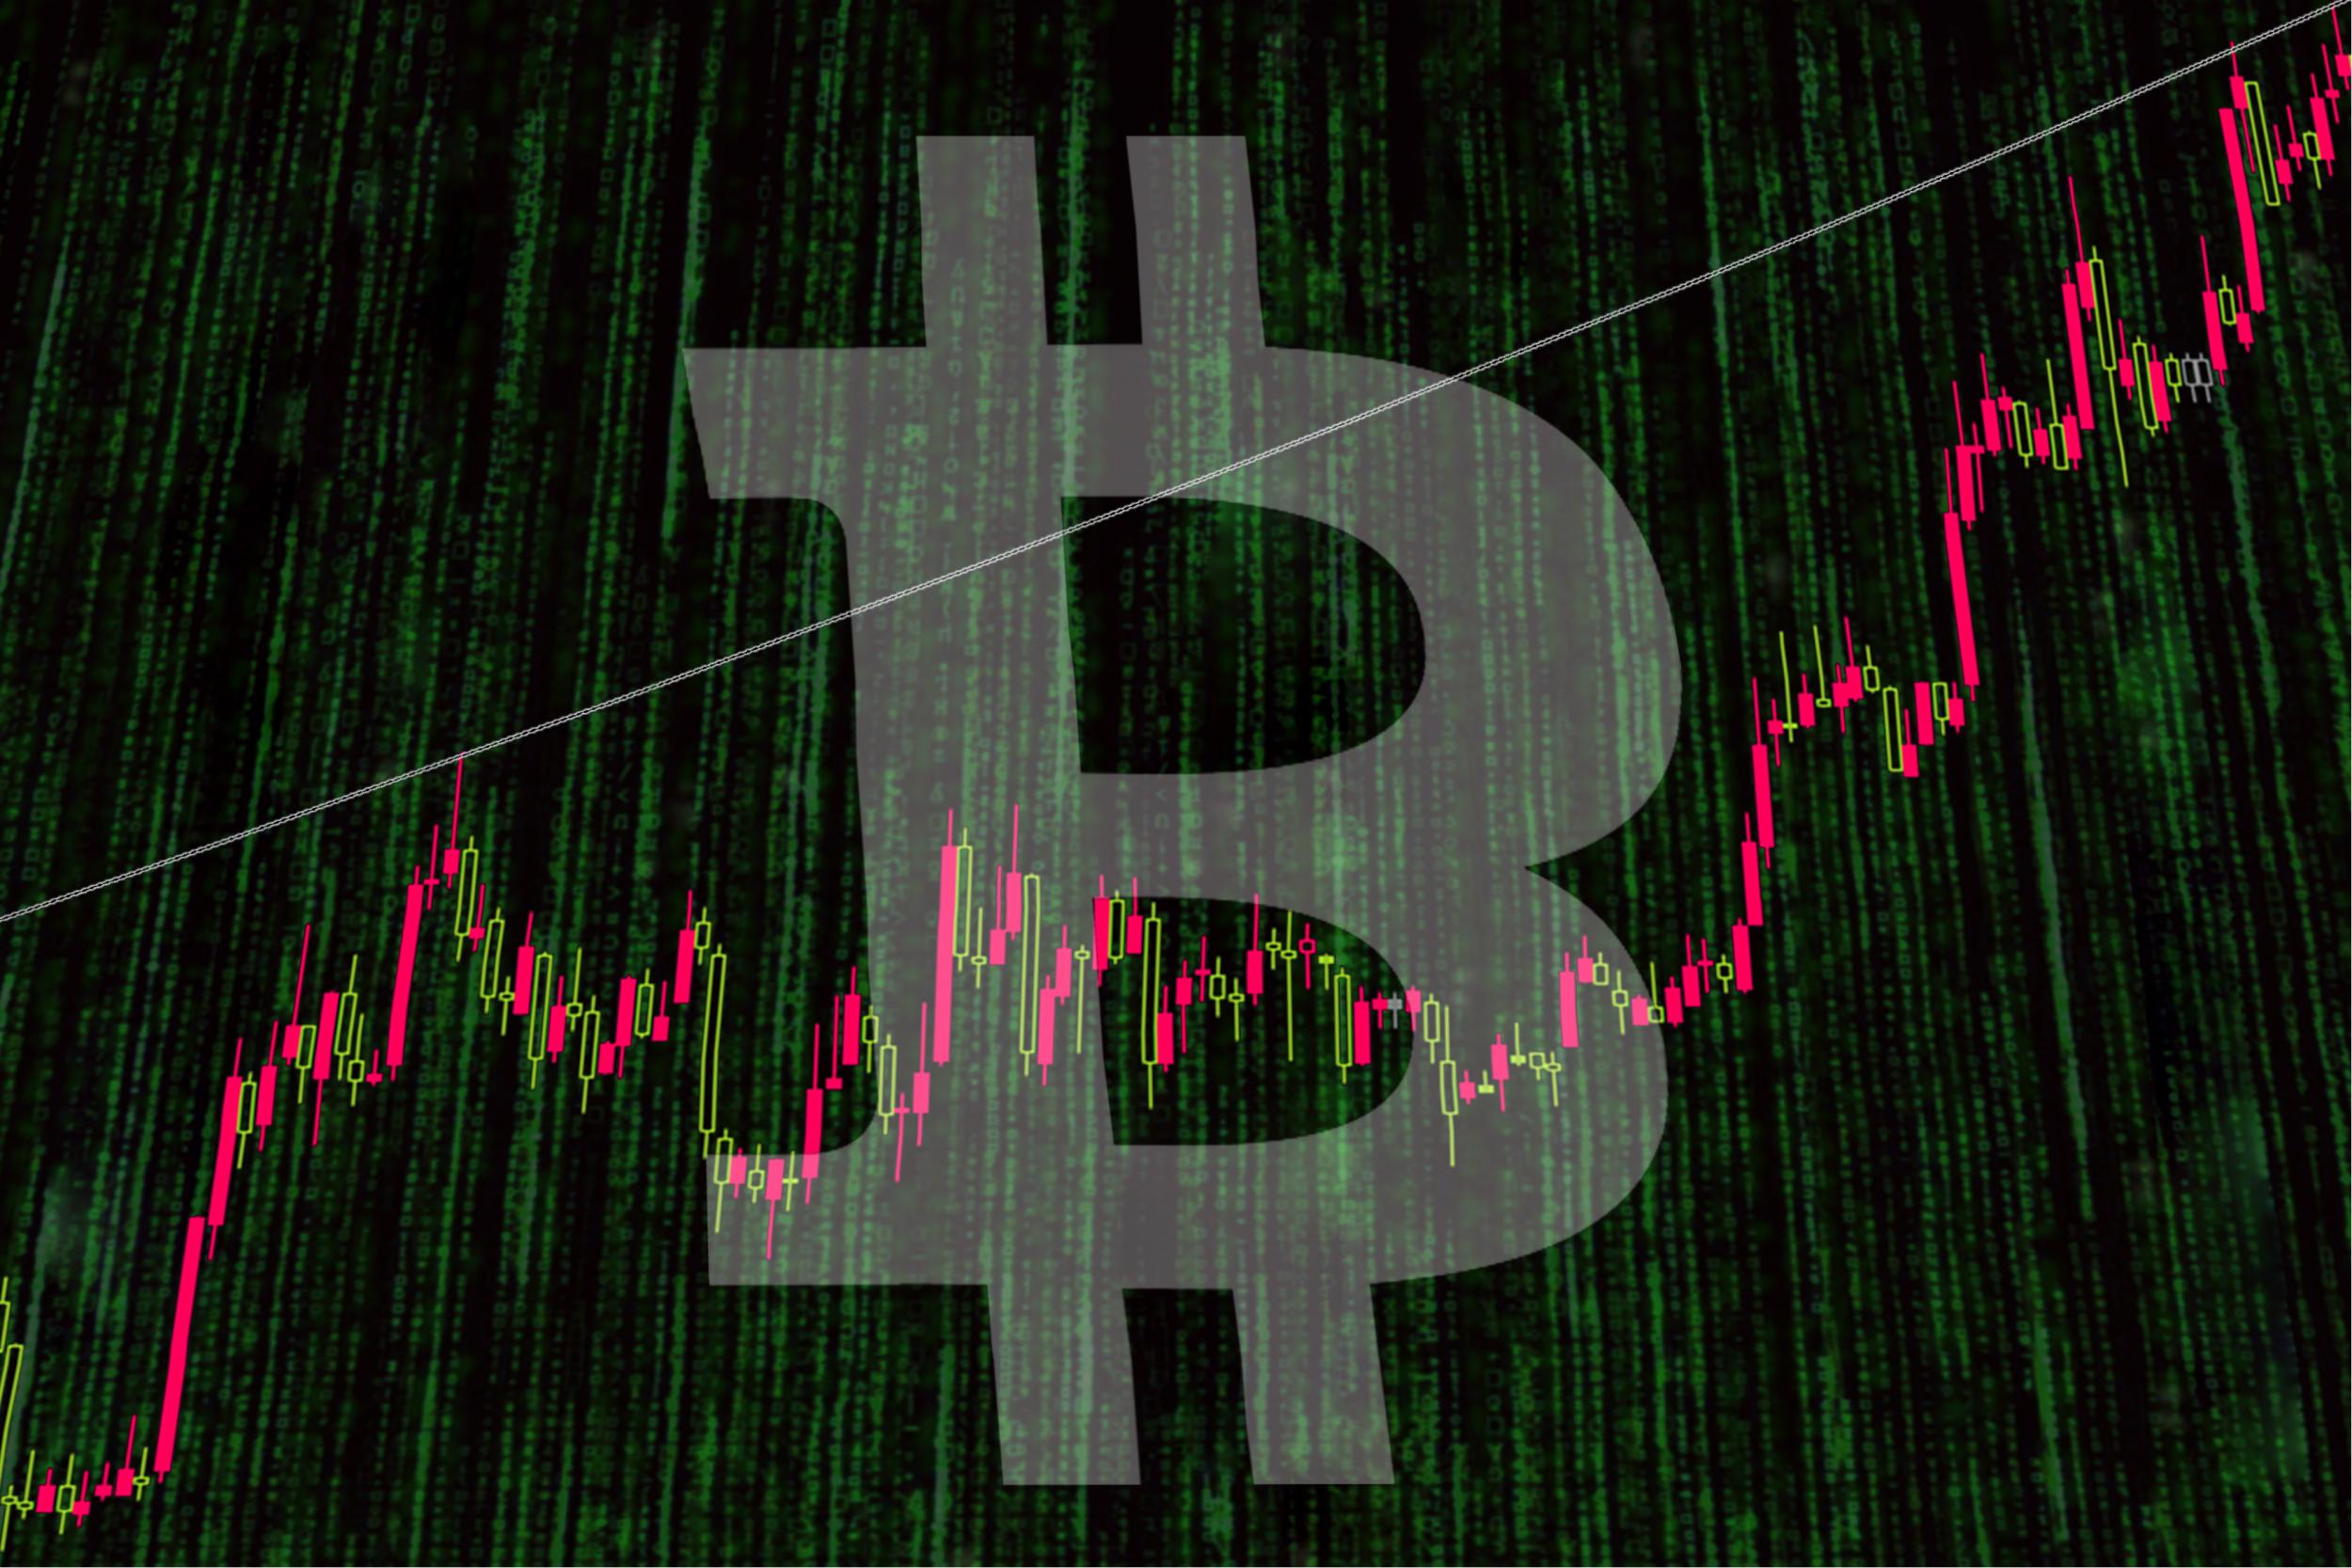 Bitcoin Price Recovery Sees Cryptocurrency Rise 100 Per Day In July - 